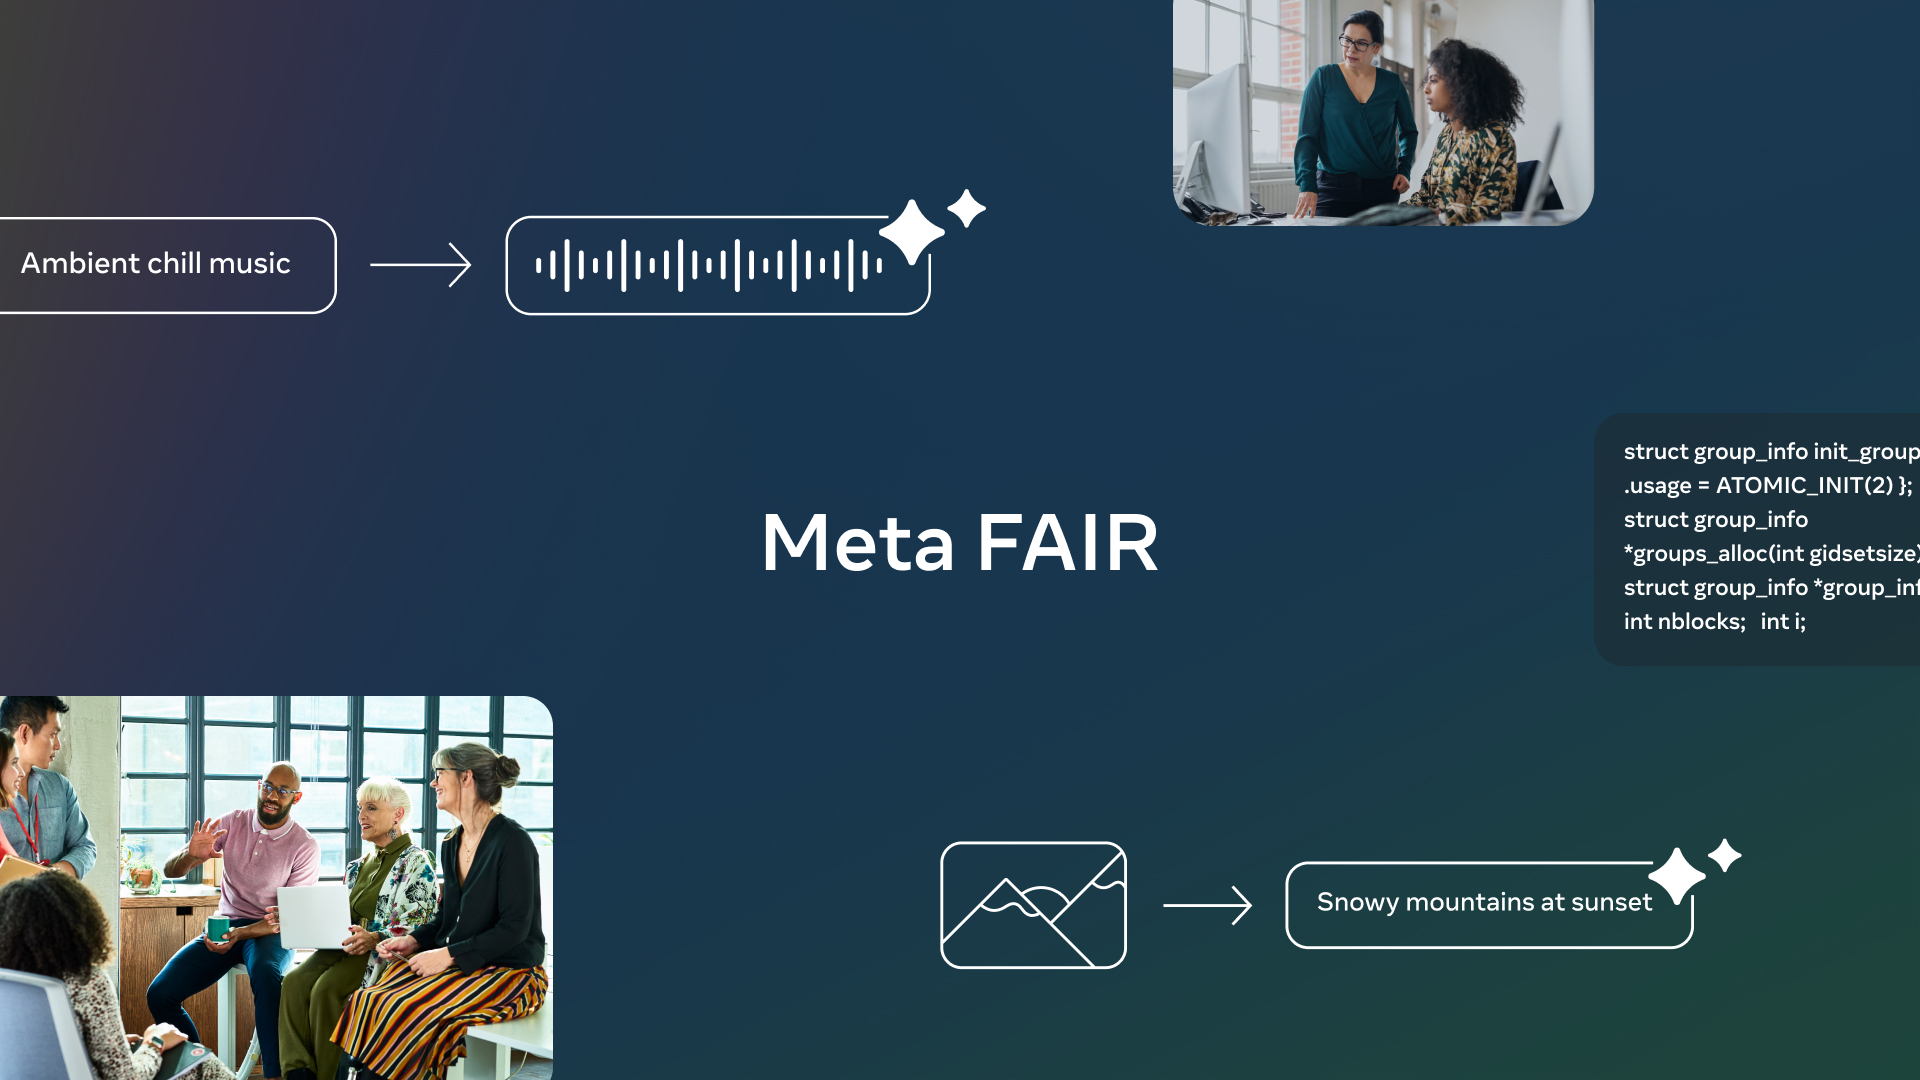 A screen showing the research of Meta FAIR.